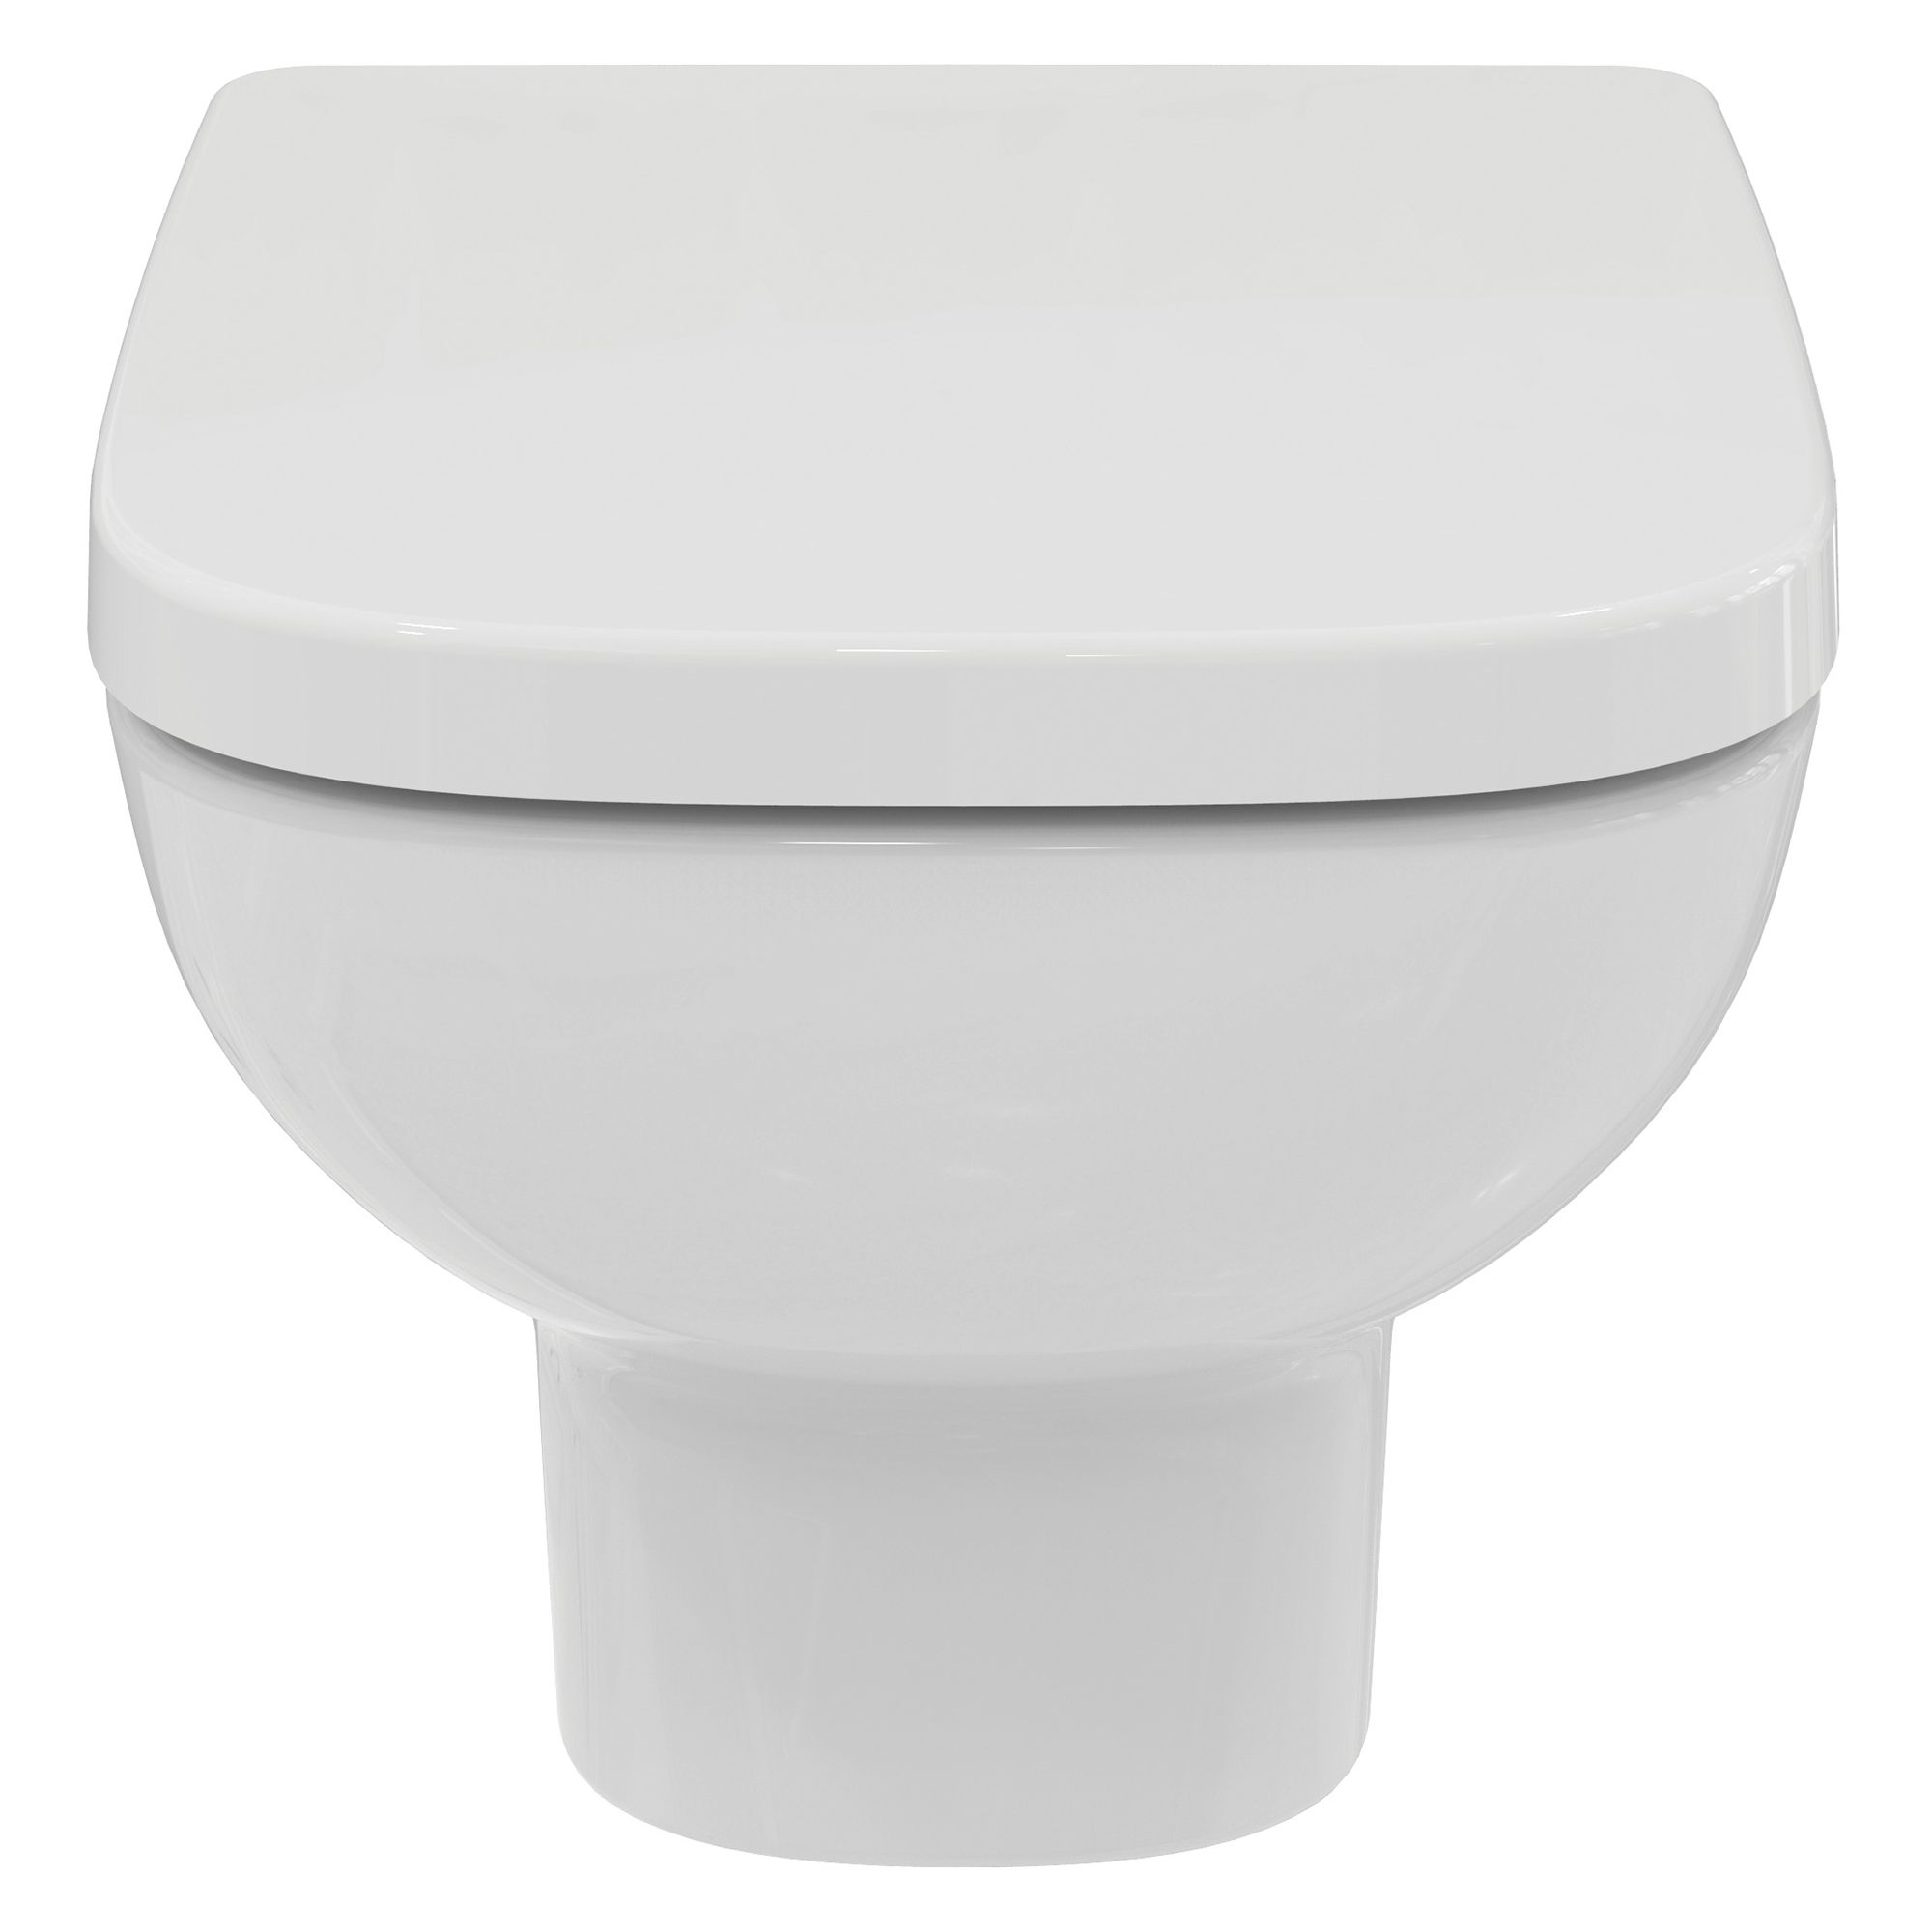 Ideal Standard i.life A White Standard Wall hung Square Toilet set with Soft close seat